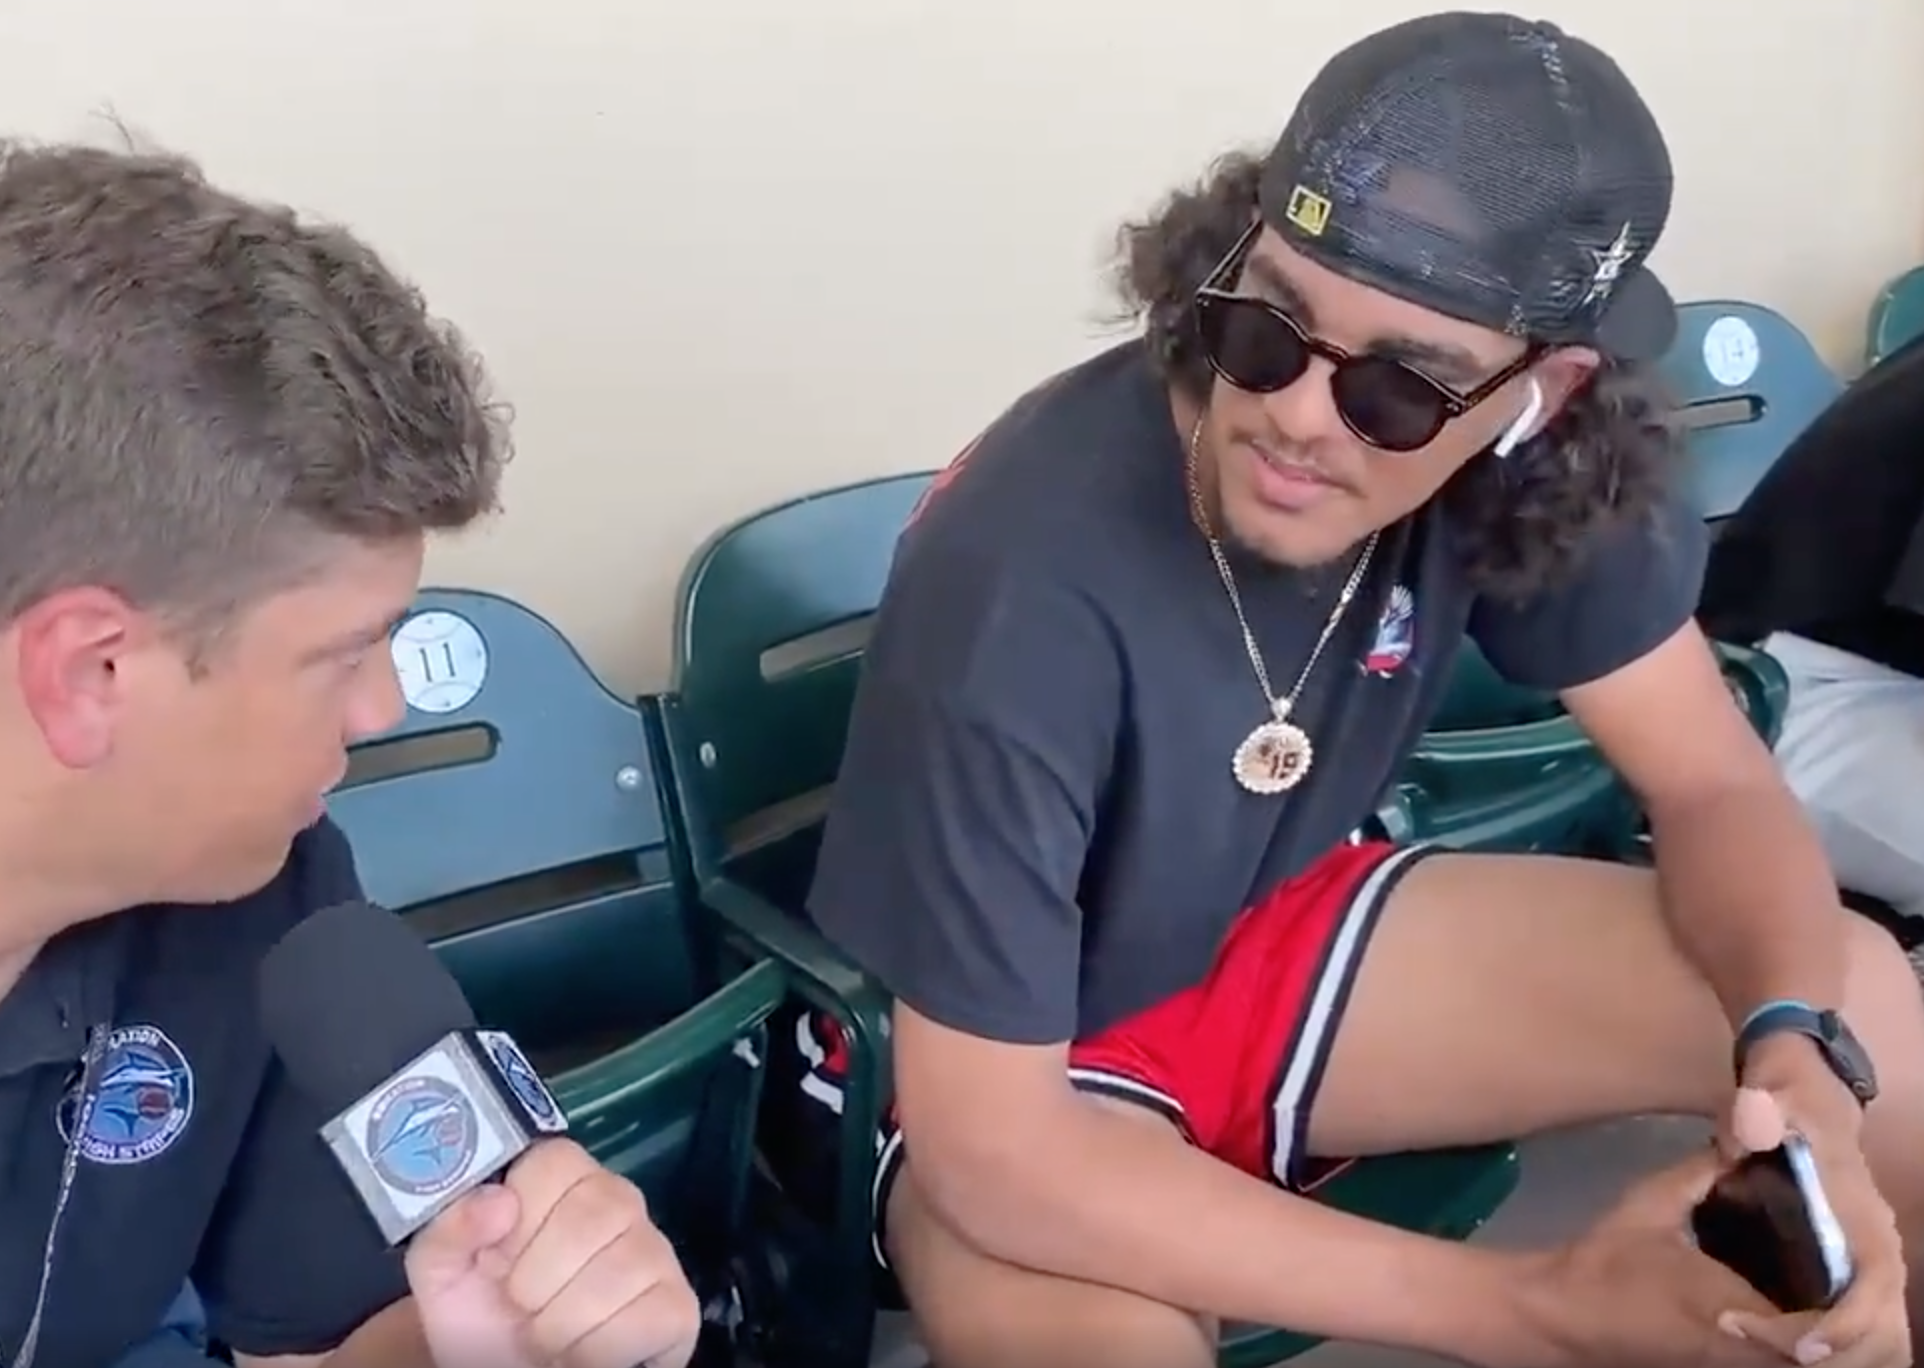 Marlins top prospect RHP Eury Pérez attends Sunday’s Jupiter Hammerheads game in street clothes